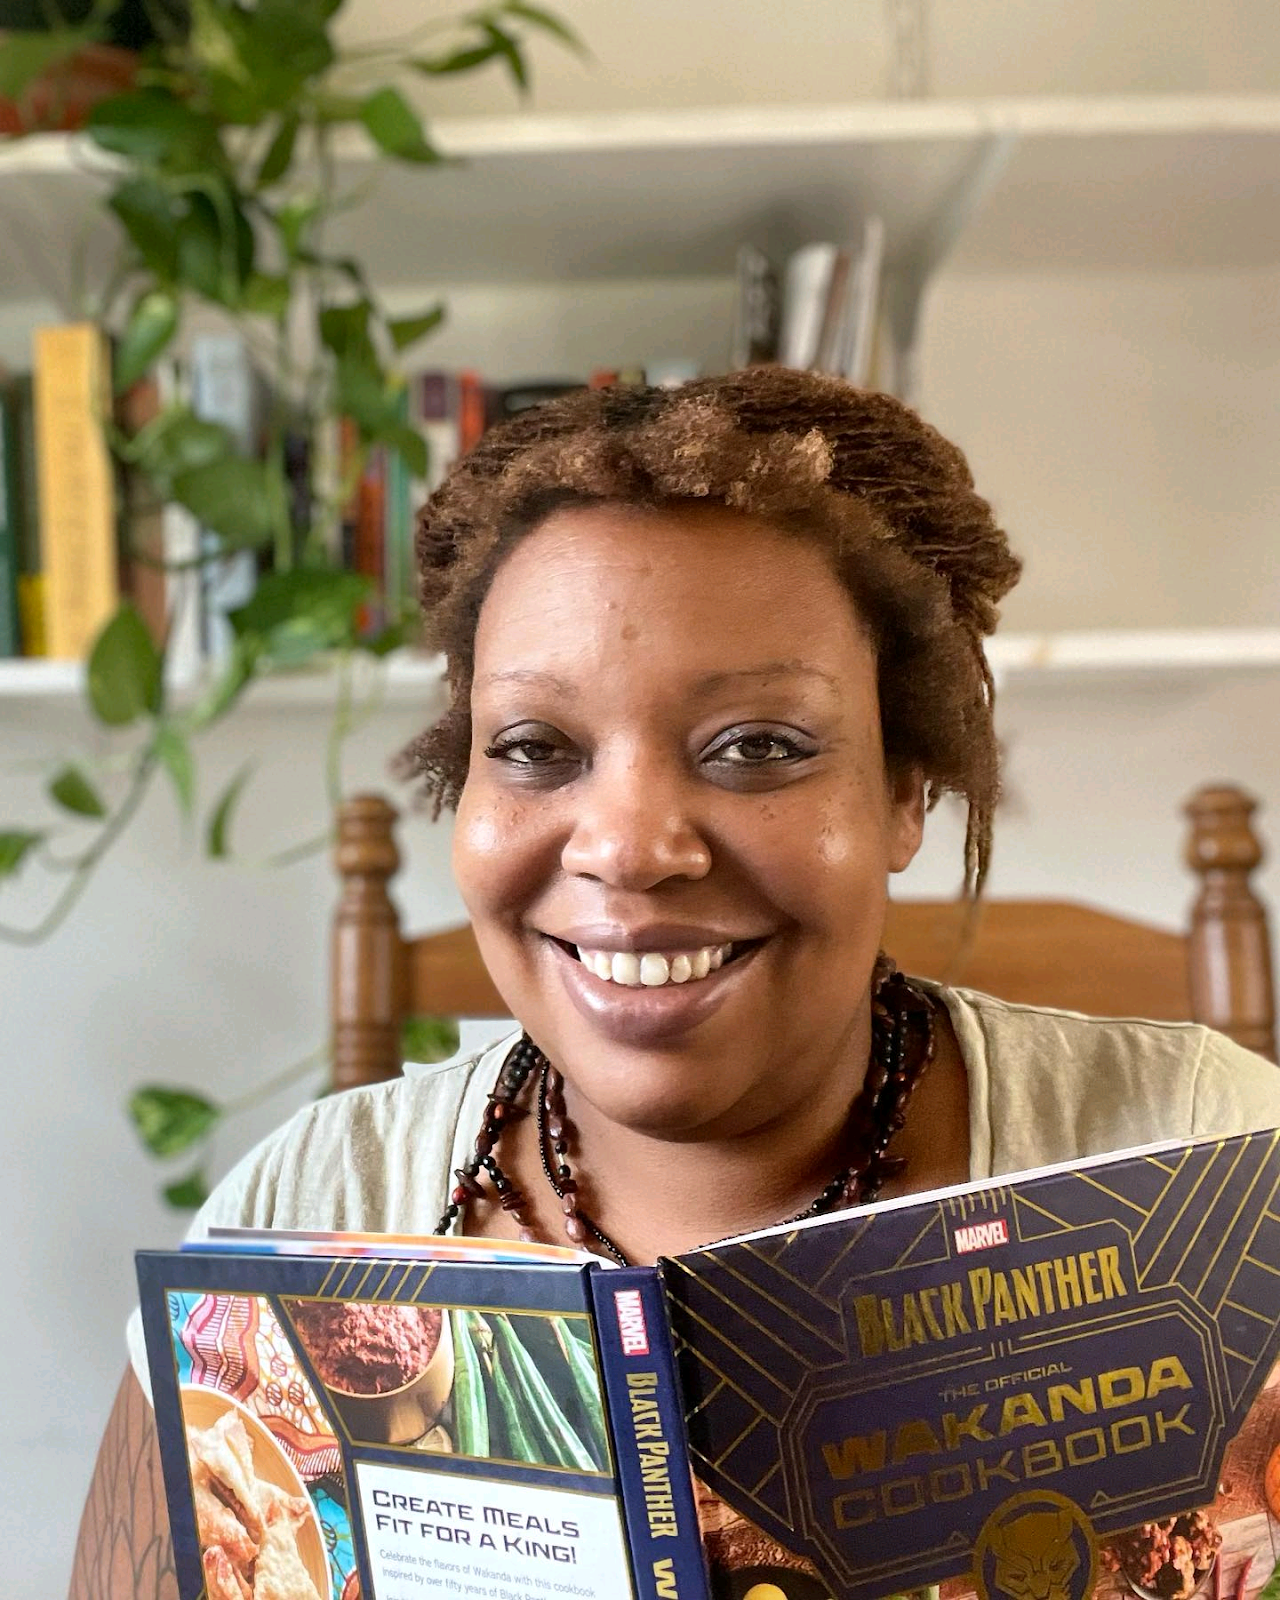 To Celebrate Black Panther, Chef Nyanyika Banda Releases 'The Official Wakanda Cookbook' | My Beautiful Black Ancestry